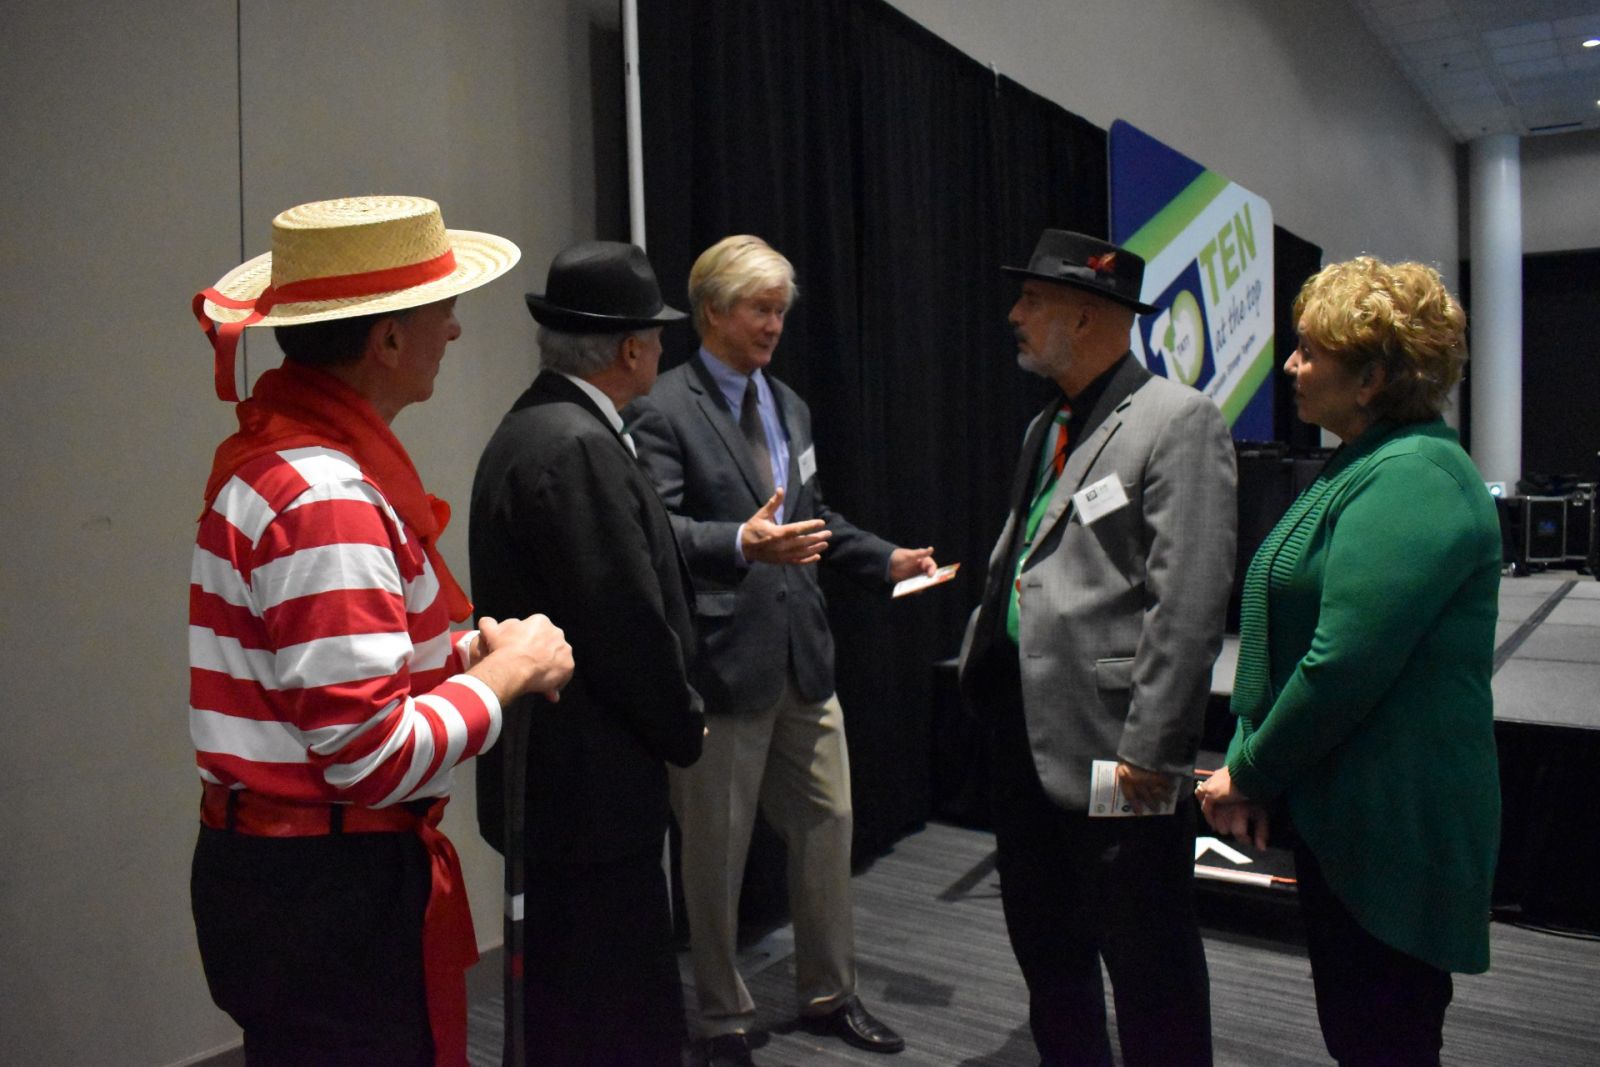 Members of the Italian American Club of Greater Greenville speak with Hughes Investments' Phil Hughes. (Photo/Molly Hulsey)